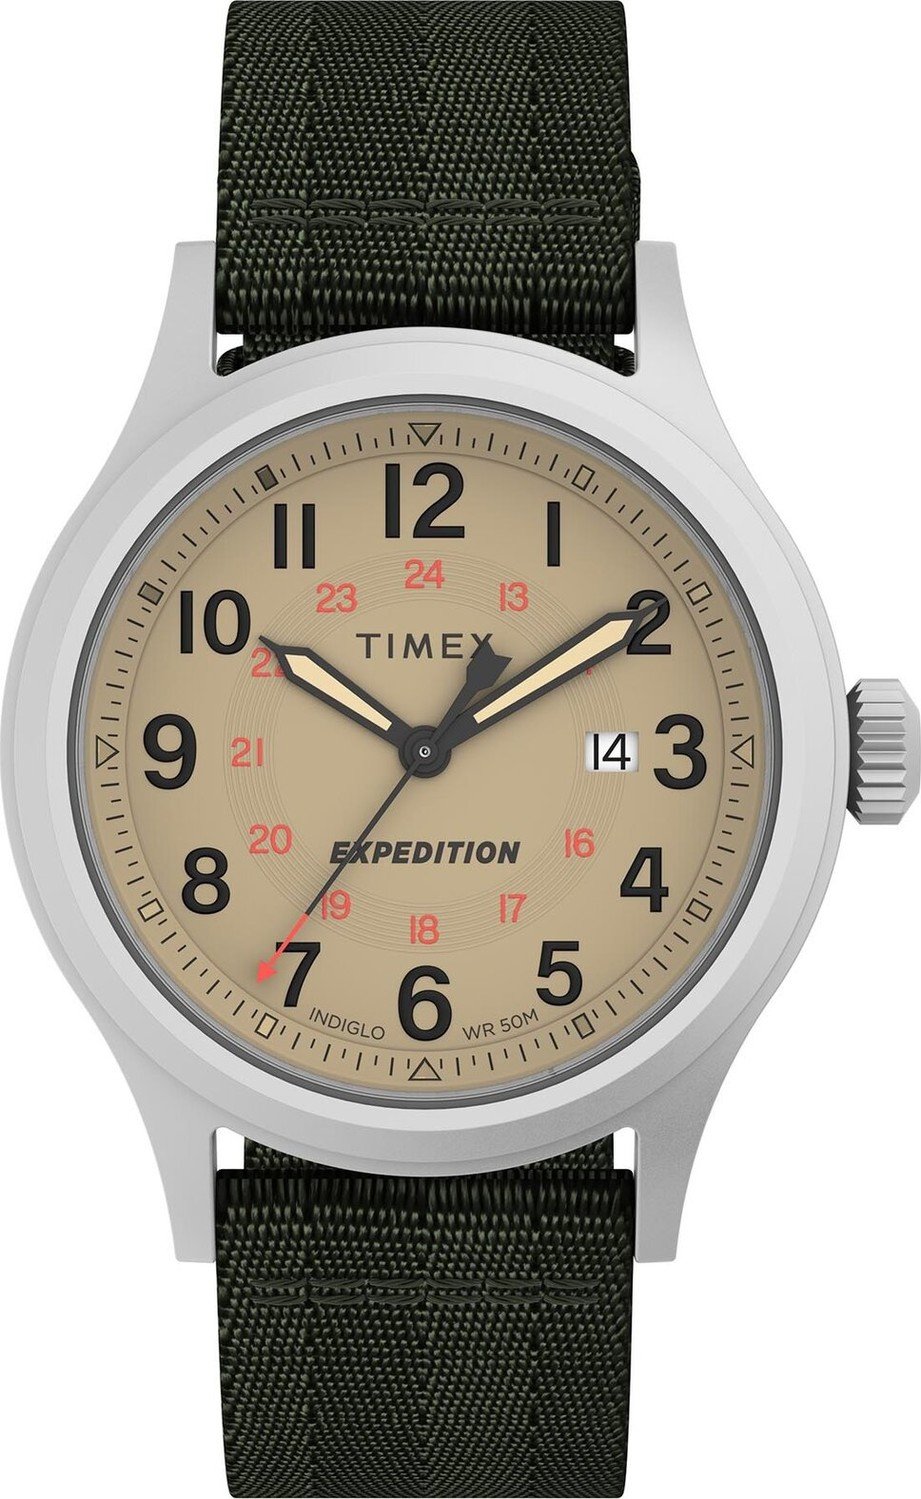 Hodinky Timex Expedition North TW2V65800 Green